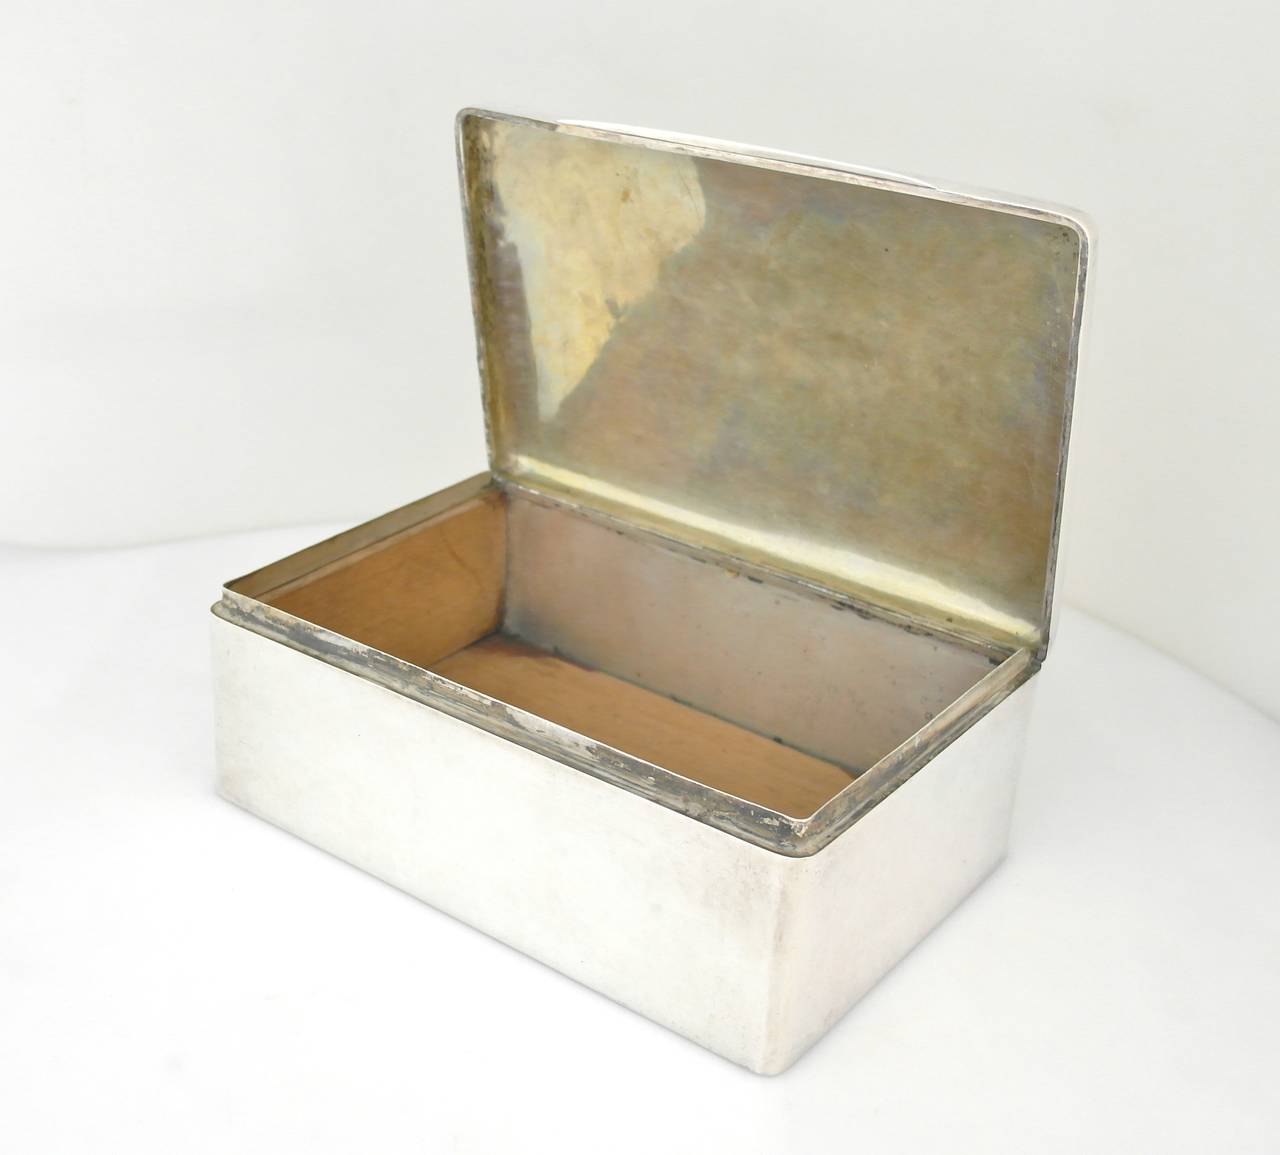 Museum Quality Richard Dimes Boston Large Hand-Wrought Sterling Silver Box 1915 3